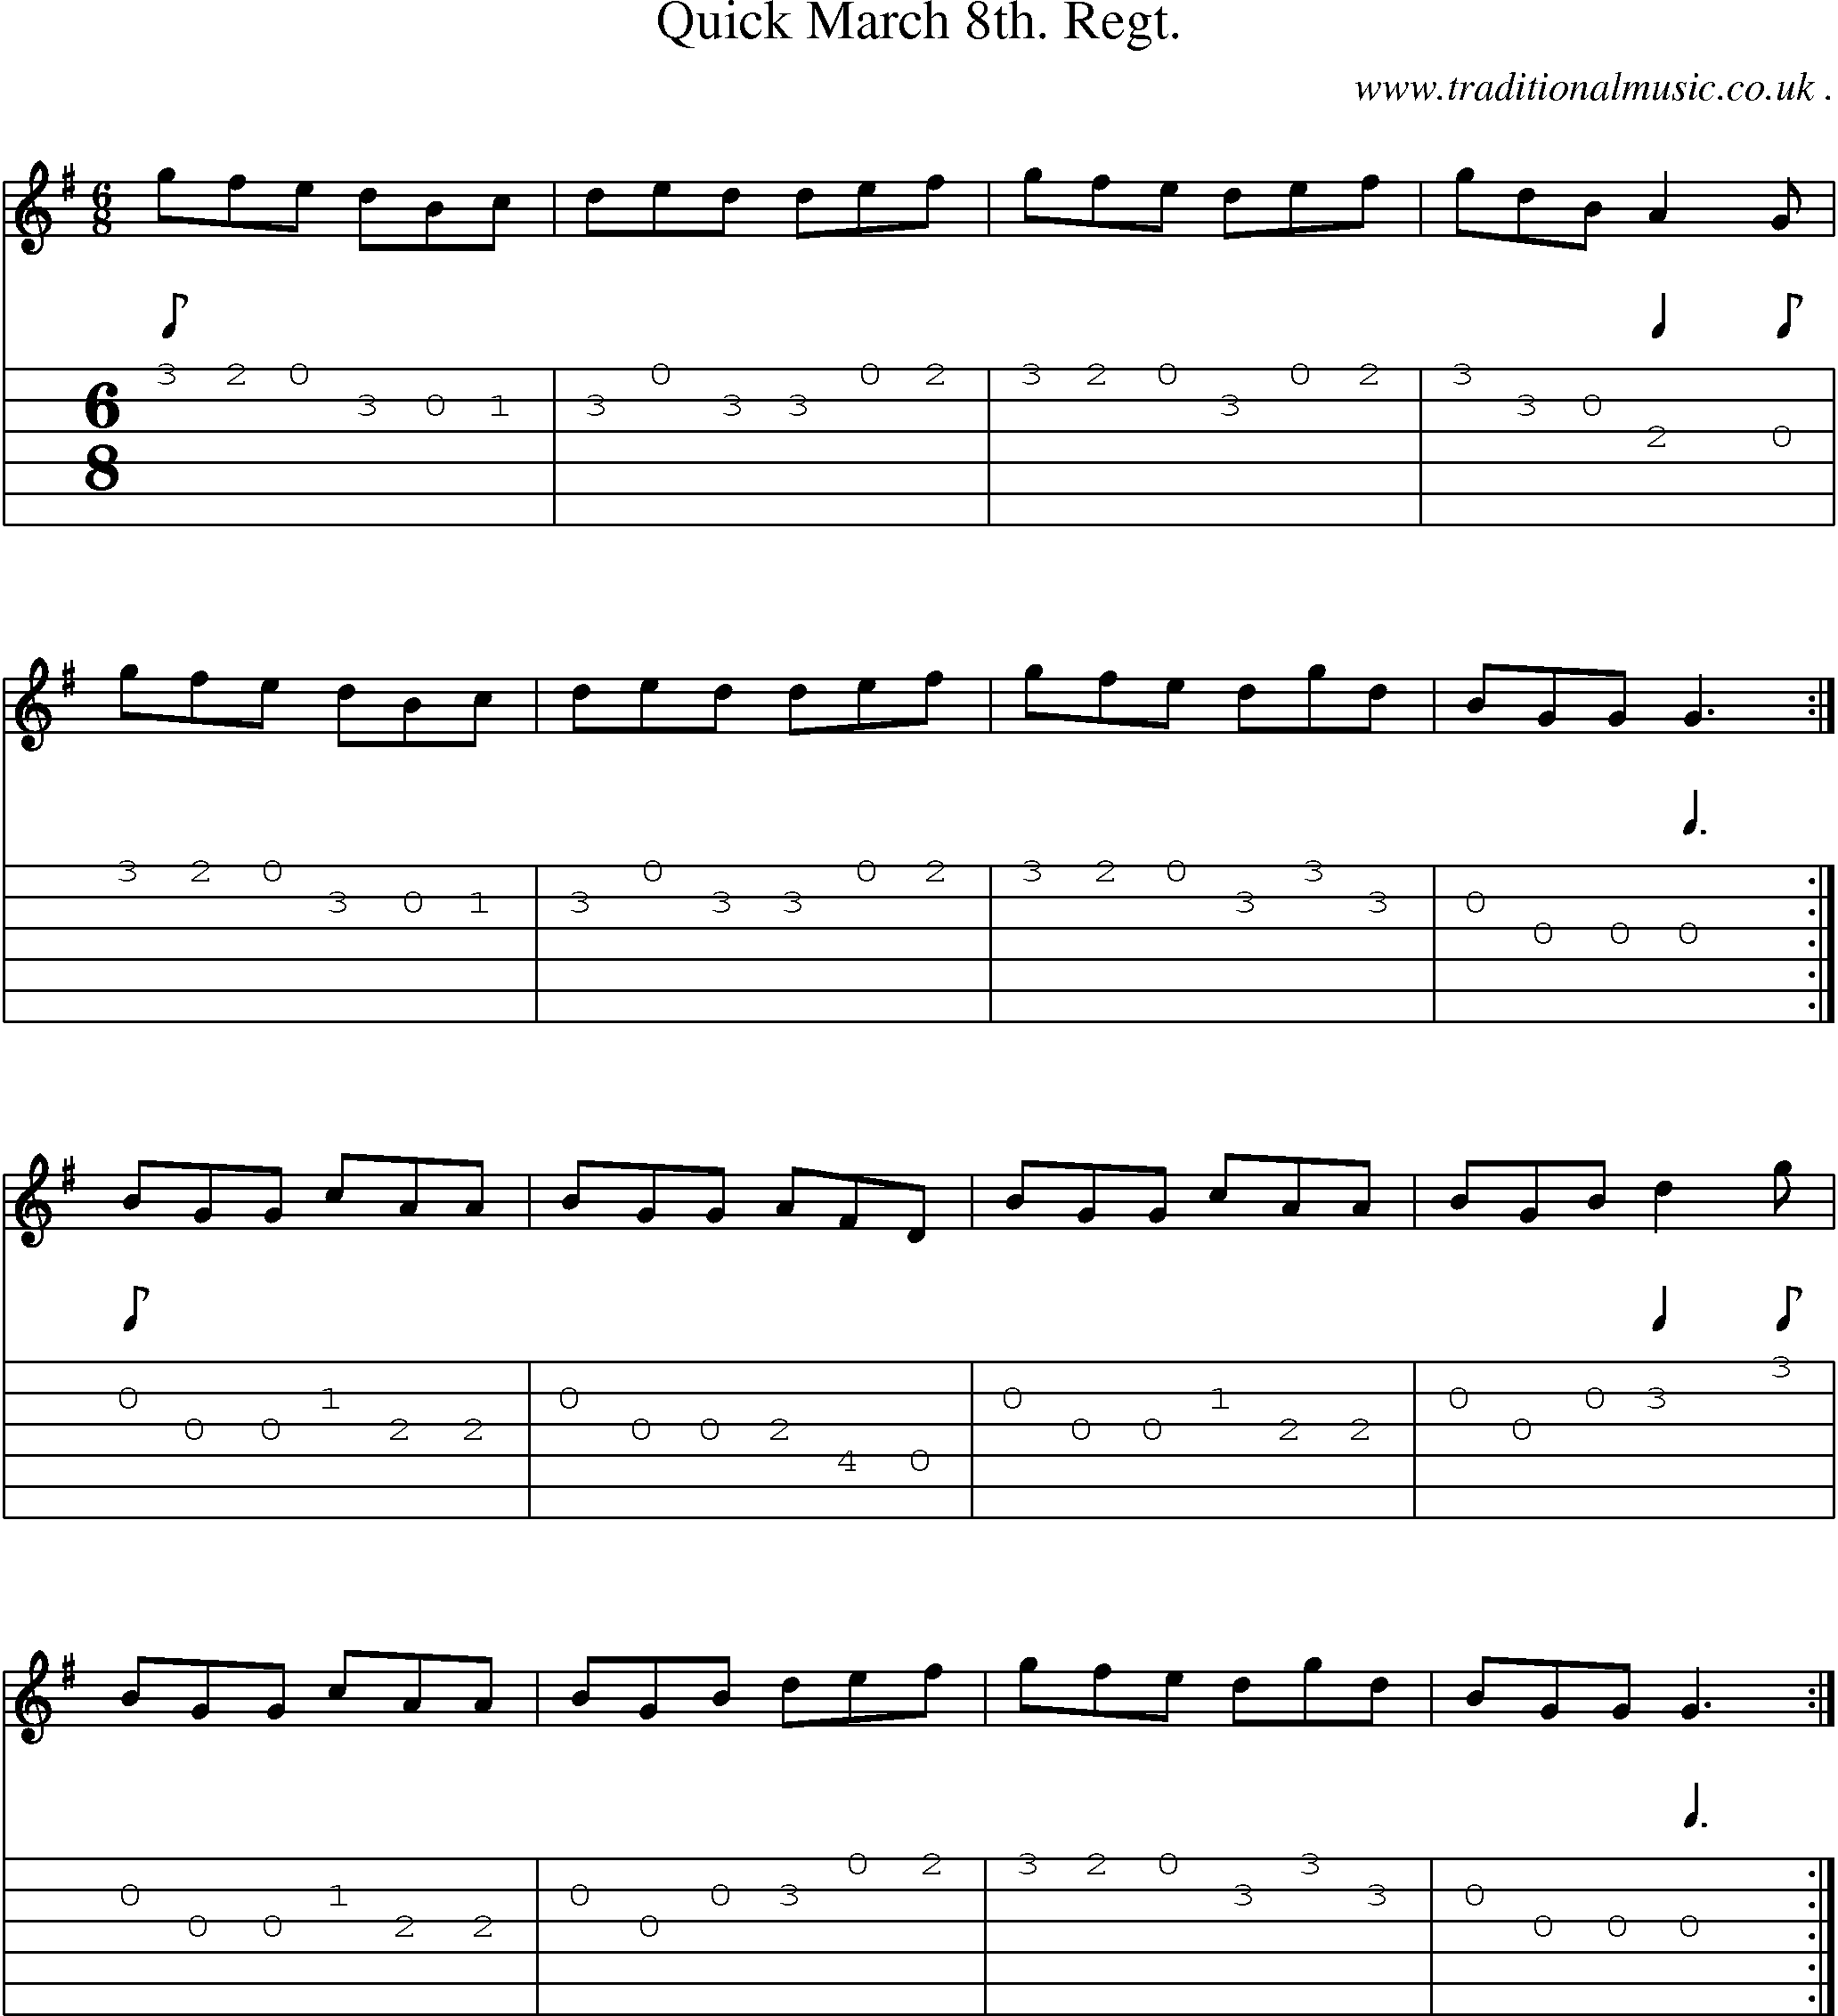 Sheet-Music and Guitar Tabs for Quick March 8th Regt